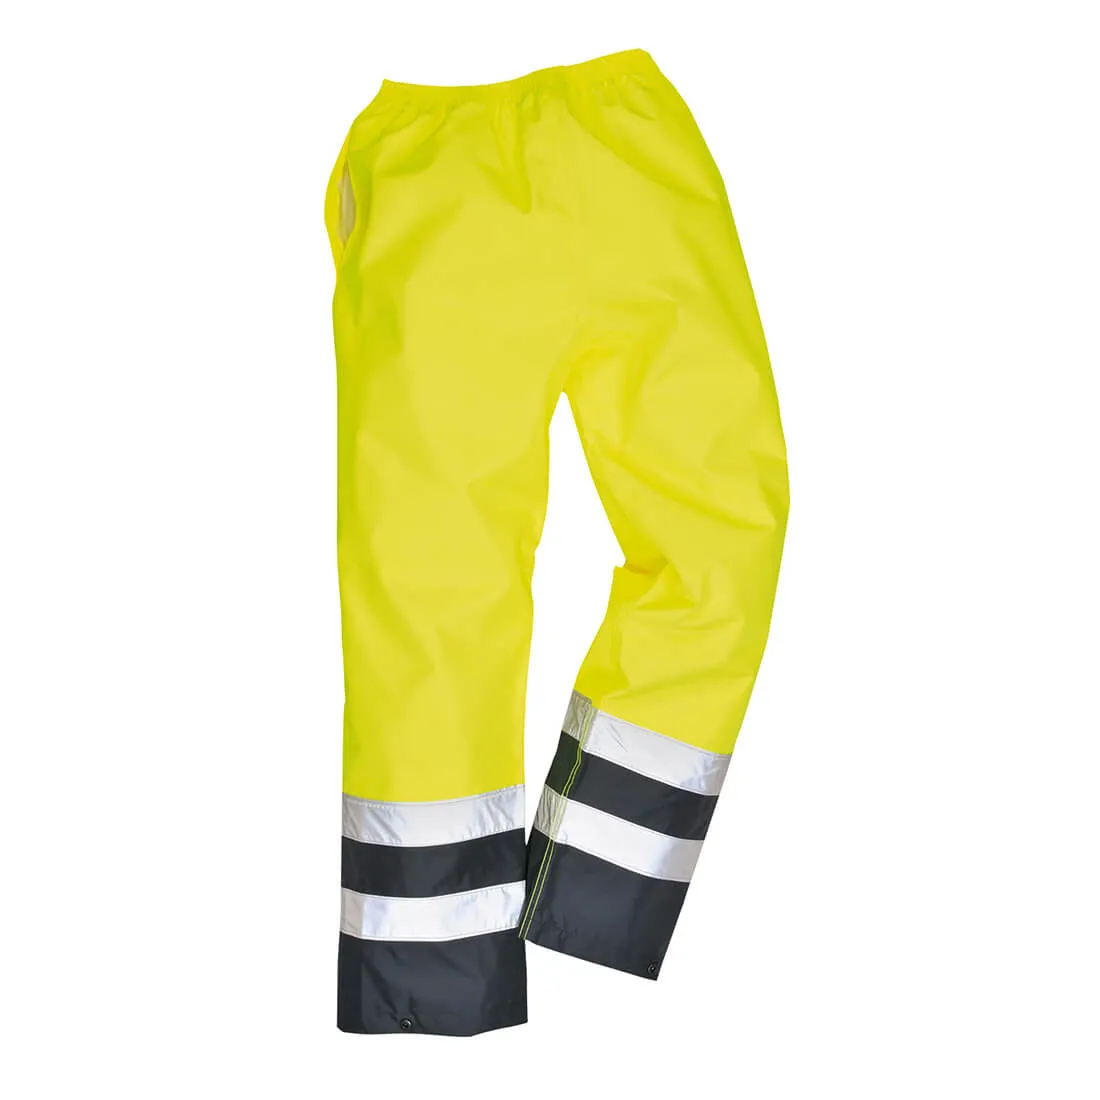 Oxford Weave 300D Class 2 Two Tone Hi Vis Trousers - Yellow / Navy, M